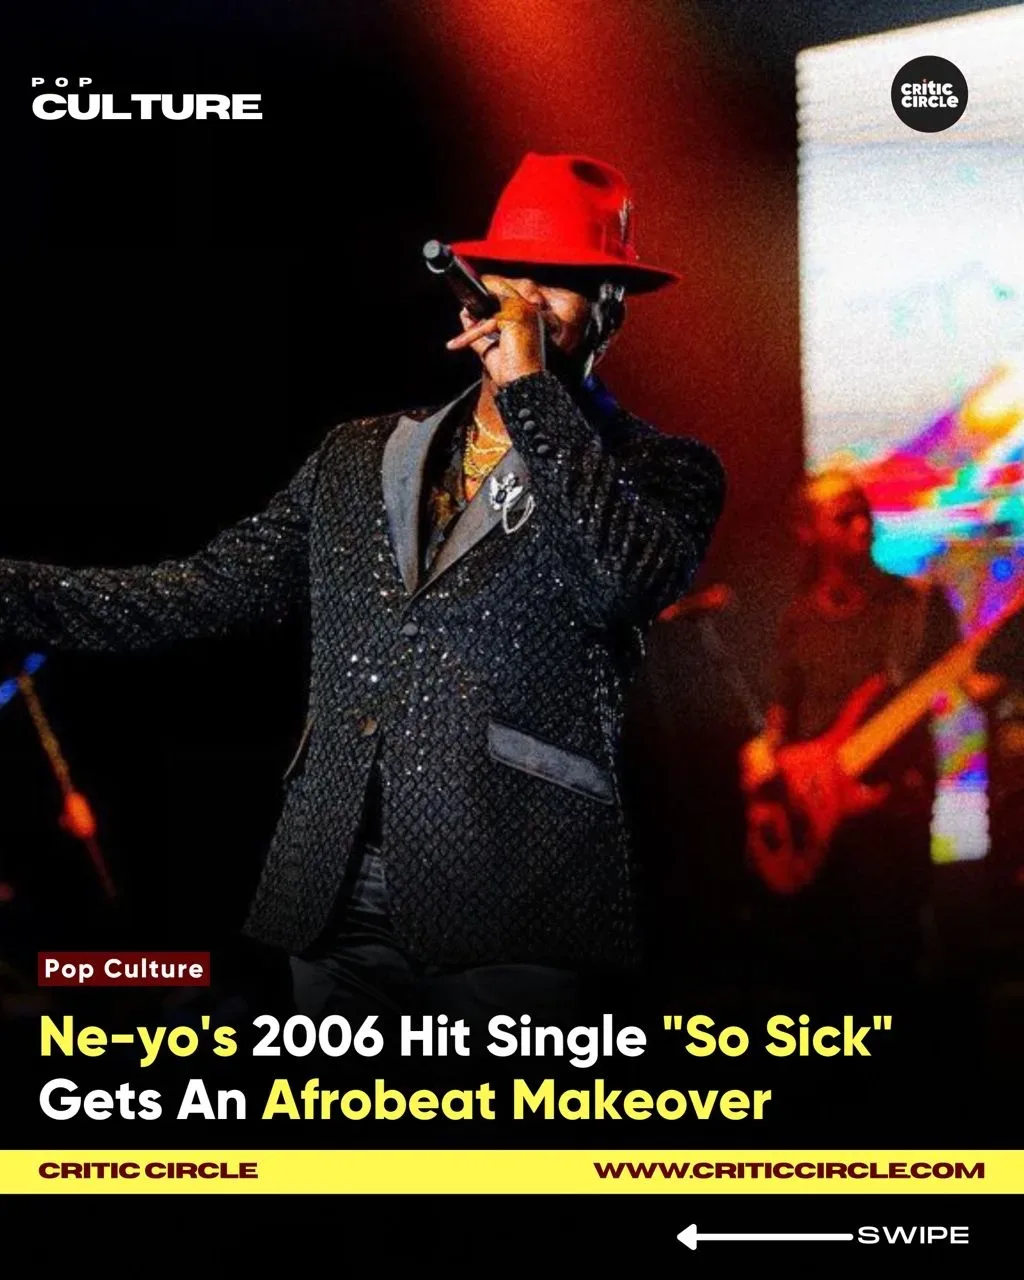 Ne-Yo's legendary 2006 smash track "So Sick" resurfaces on social media with a new sound. HappiMusic, the producer, has converted the song, which previously earned excellent acclaim, into an Afrobeat rendition.